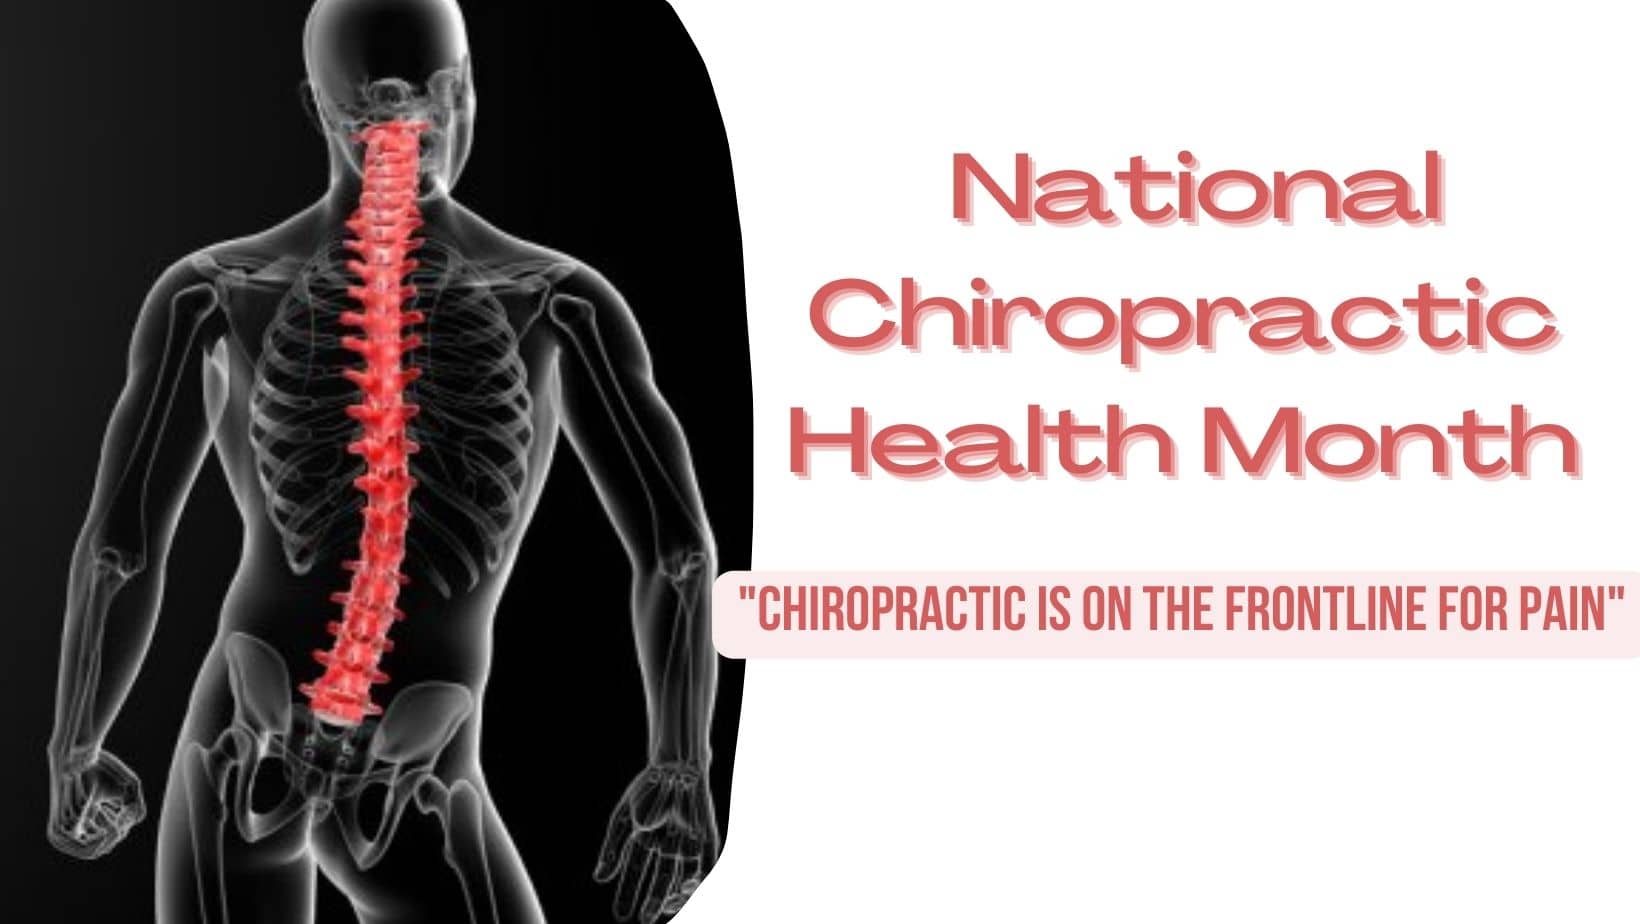 National Chiropractic Health Month